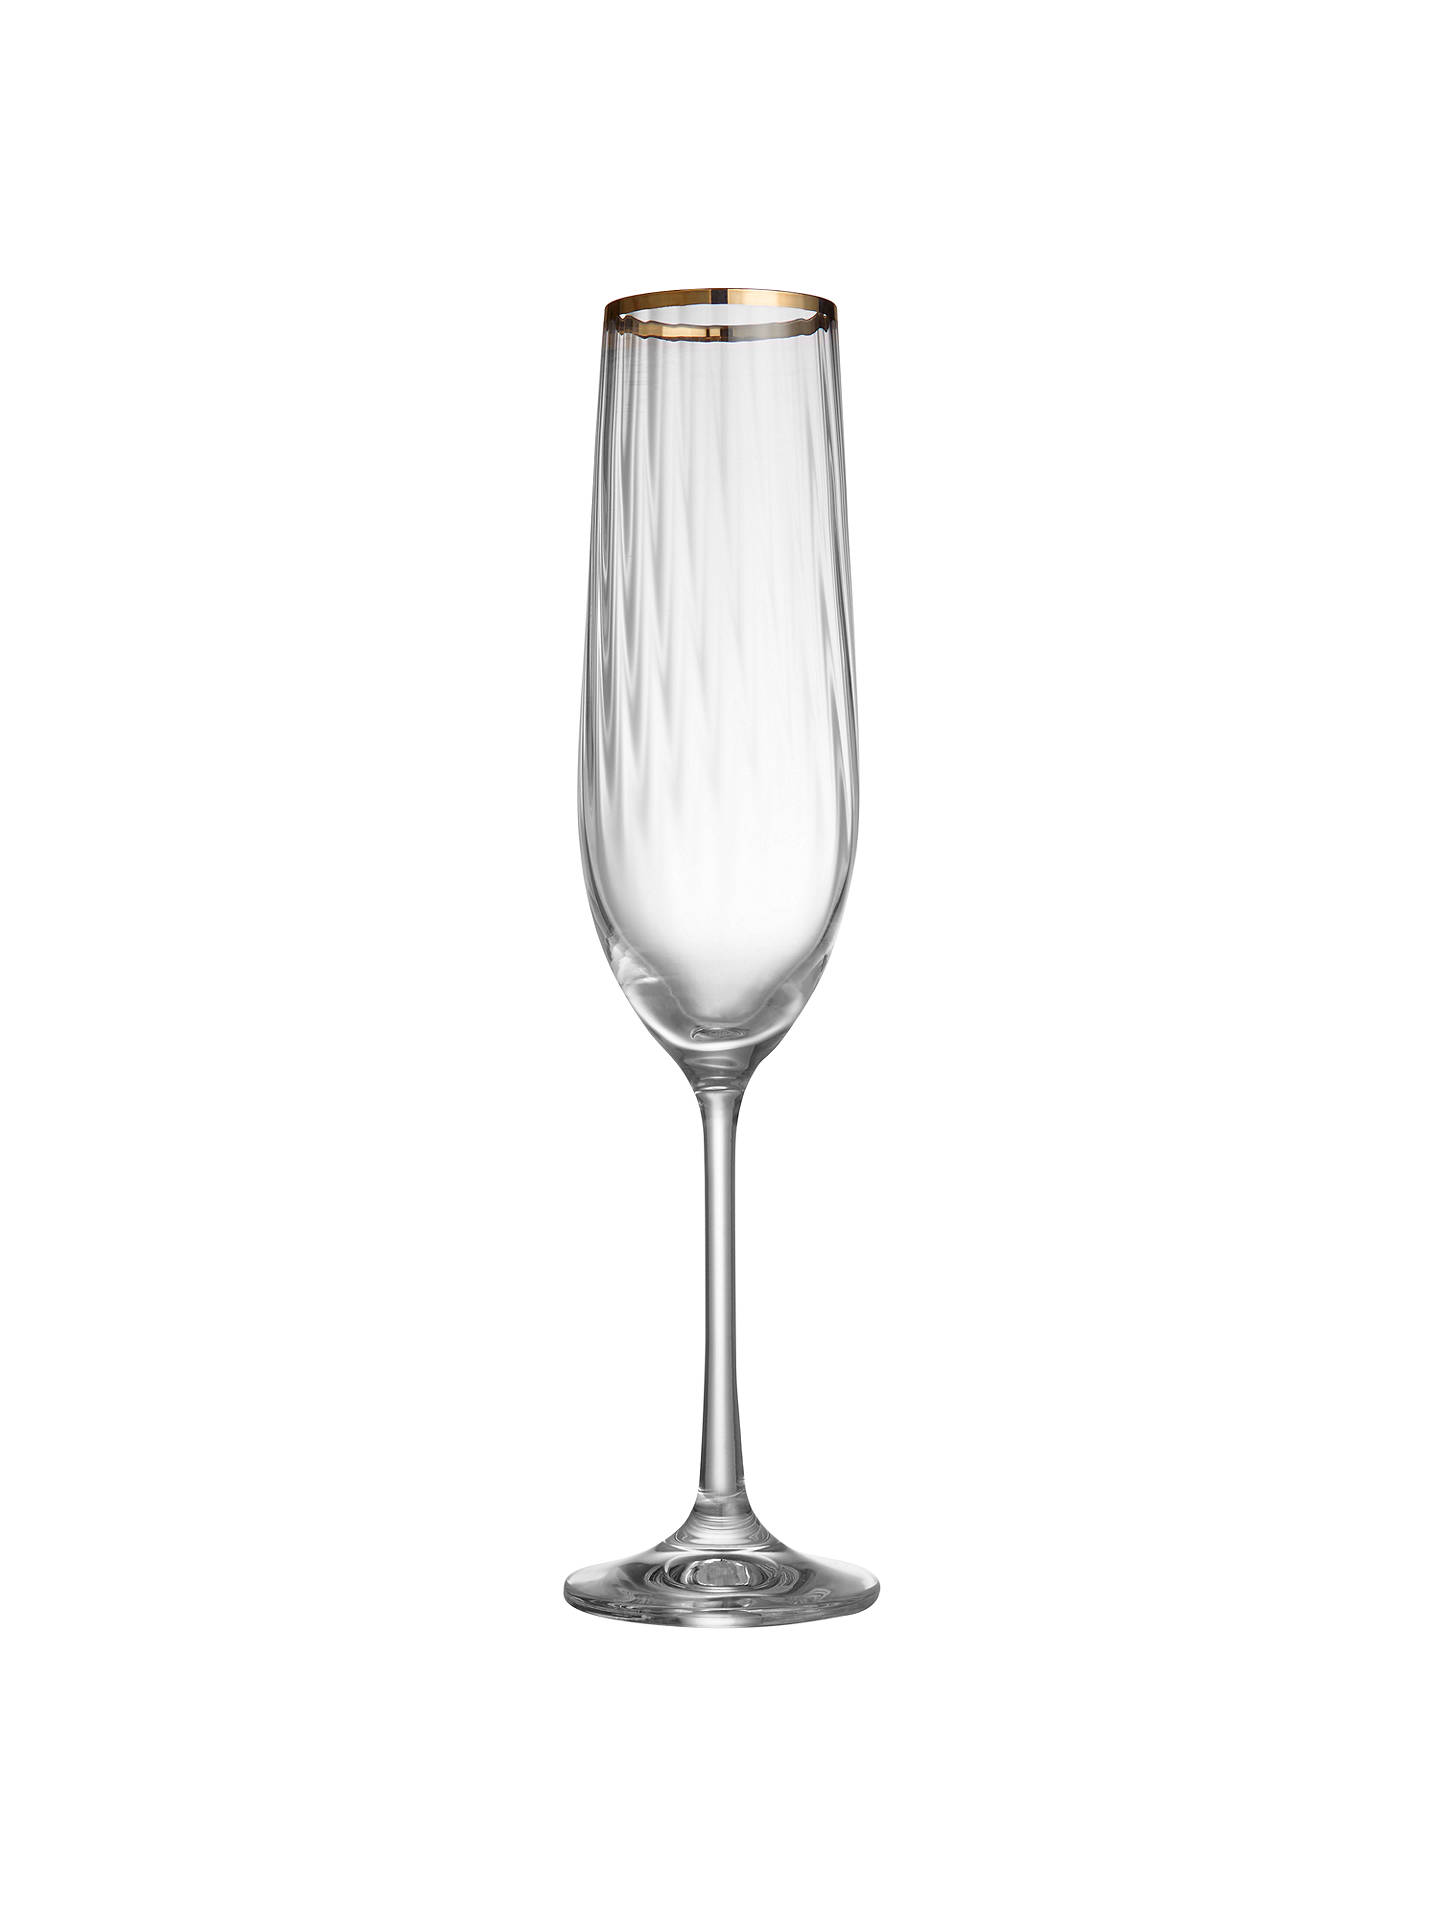 John Lewis Croft Collection Waterfall Champagne Flute, Clear, 190ml at ...